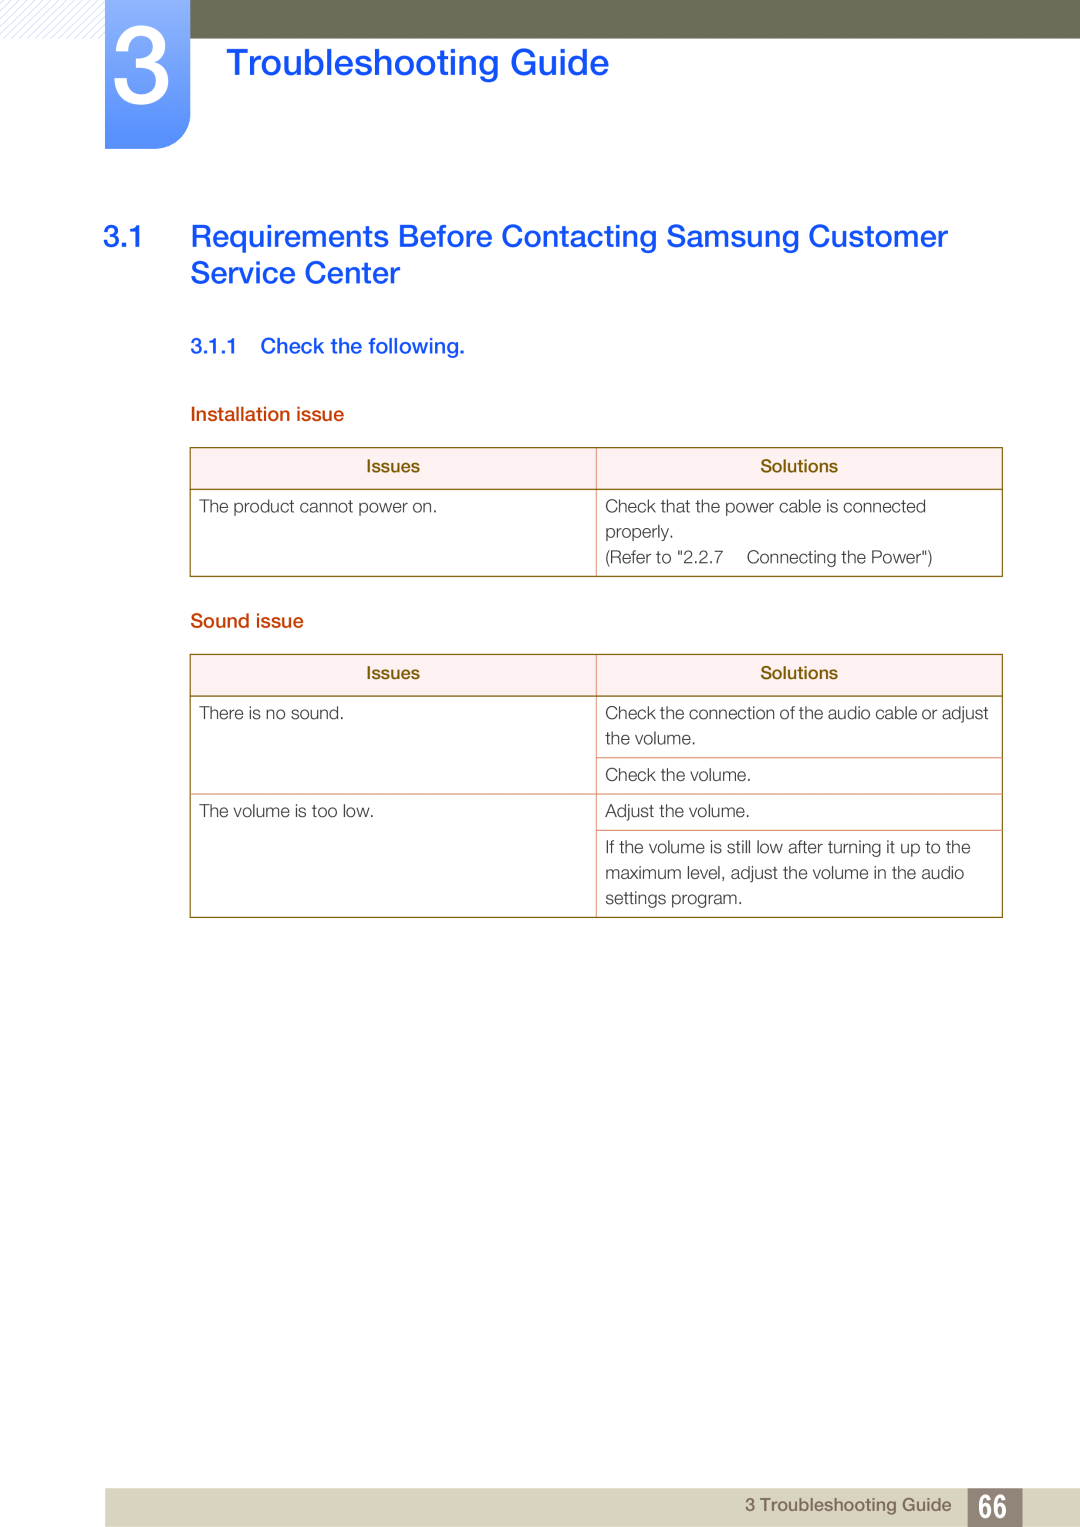 Samsung LF00FNXPFBZXEN Troubleshooting Guide, Requirements Before Contacting Samsung Customer Service Center, Sound issue 